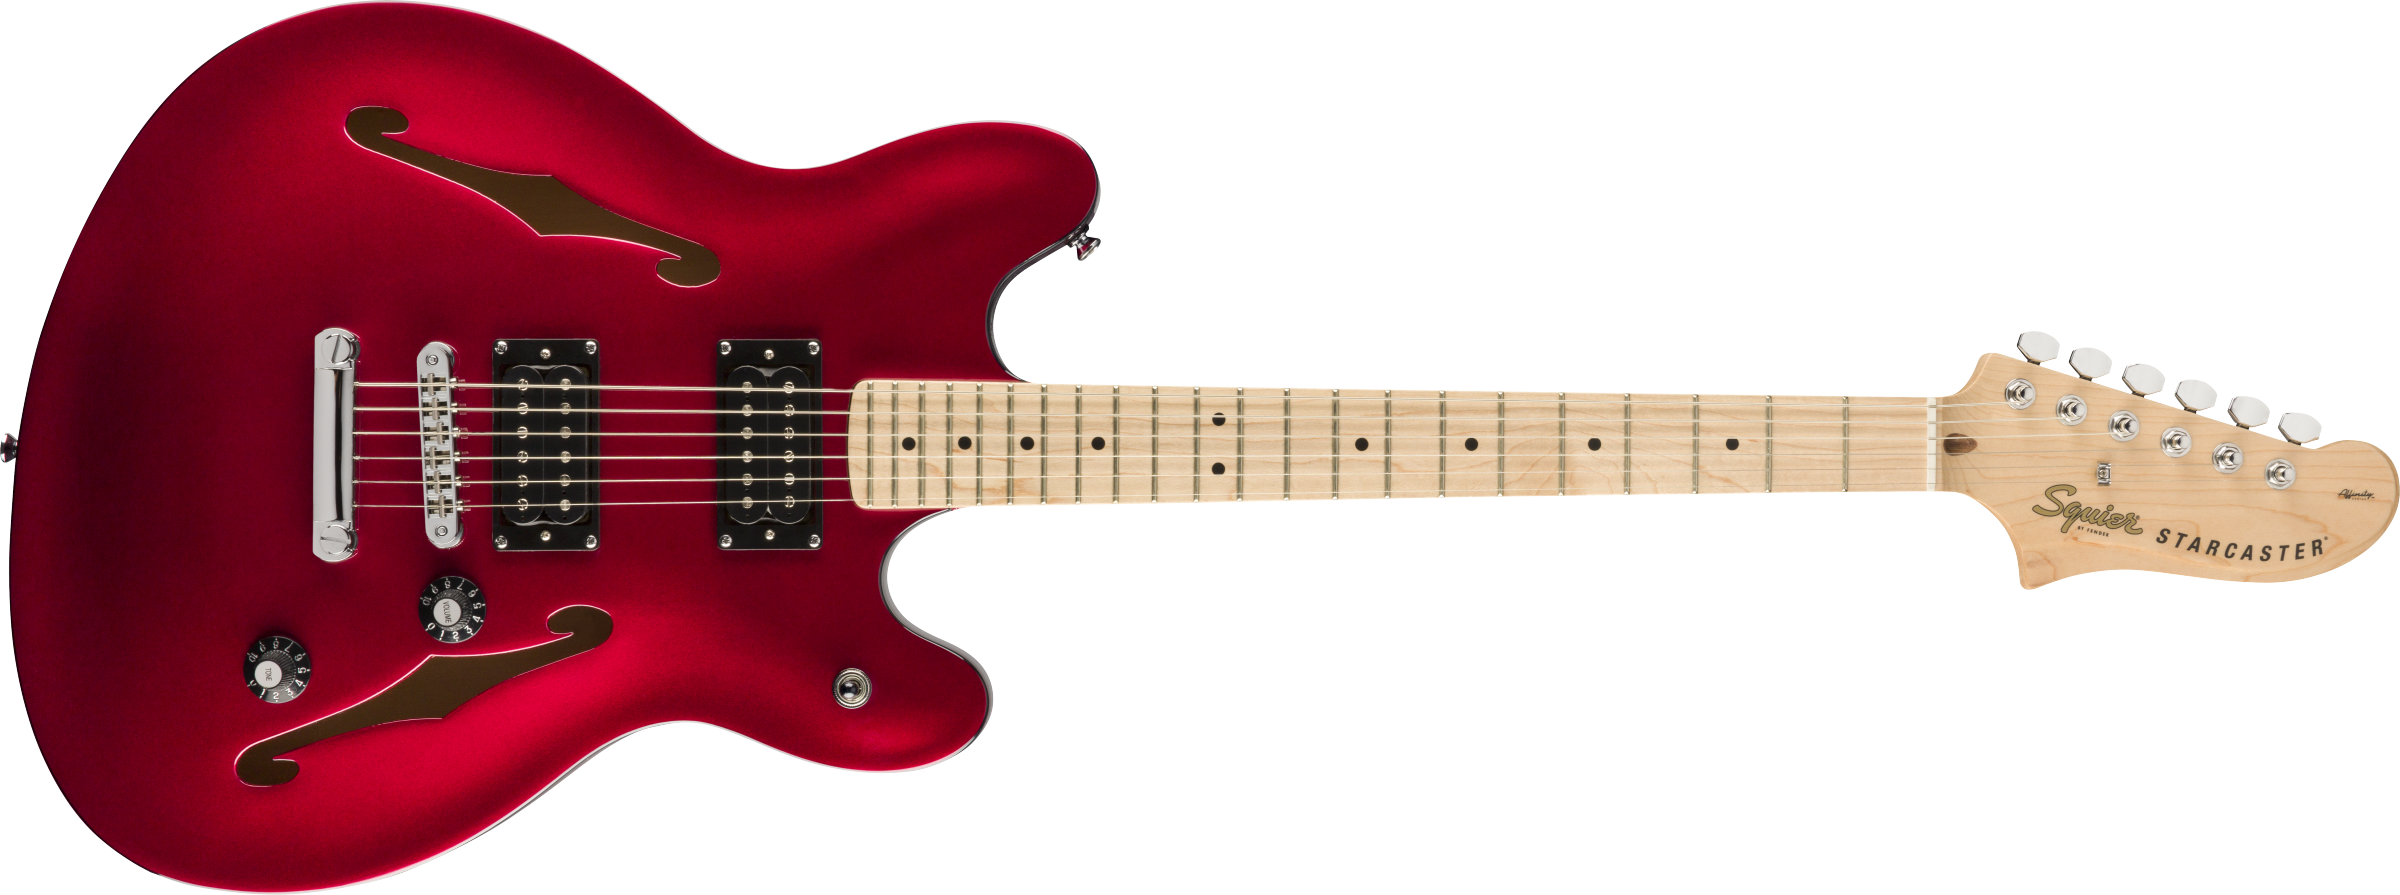 Squier Affinity Series Starcaster, Maple Fingerboard, Candy Apple Red 0370590509